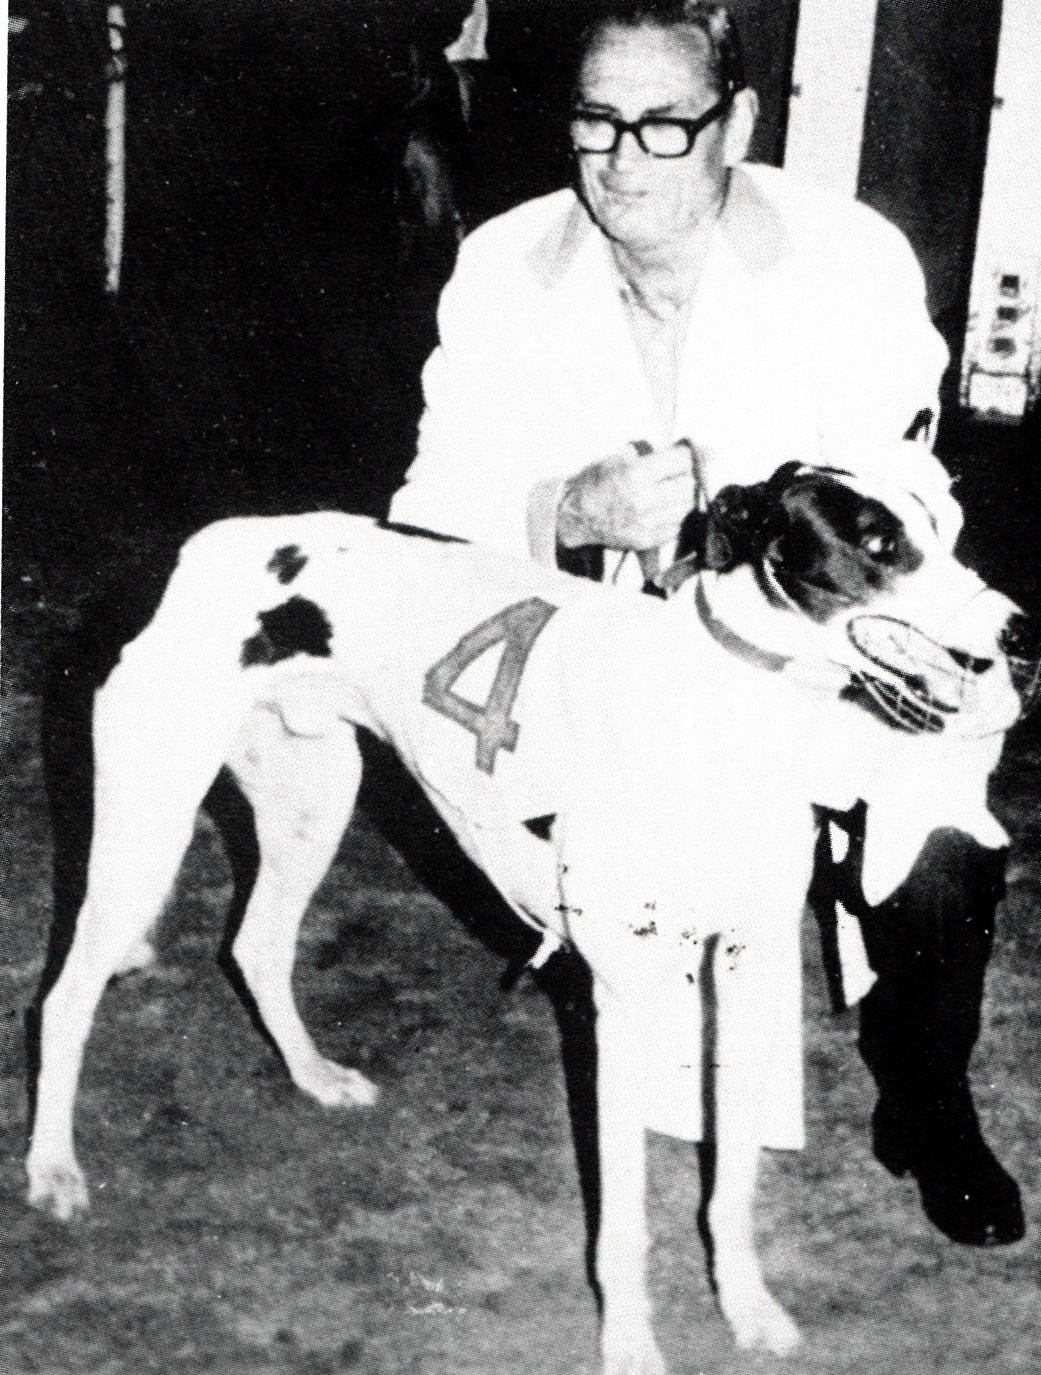 Half Your Luck Australian Cup 73 – History of Greyhound Racing in Australia